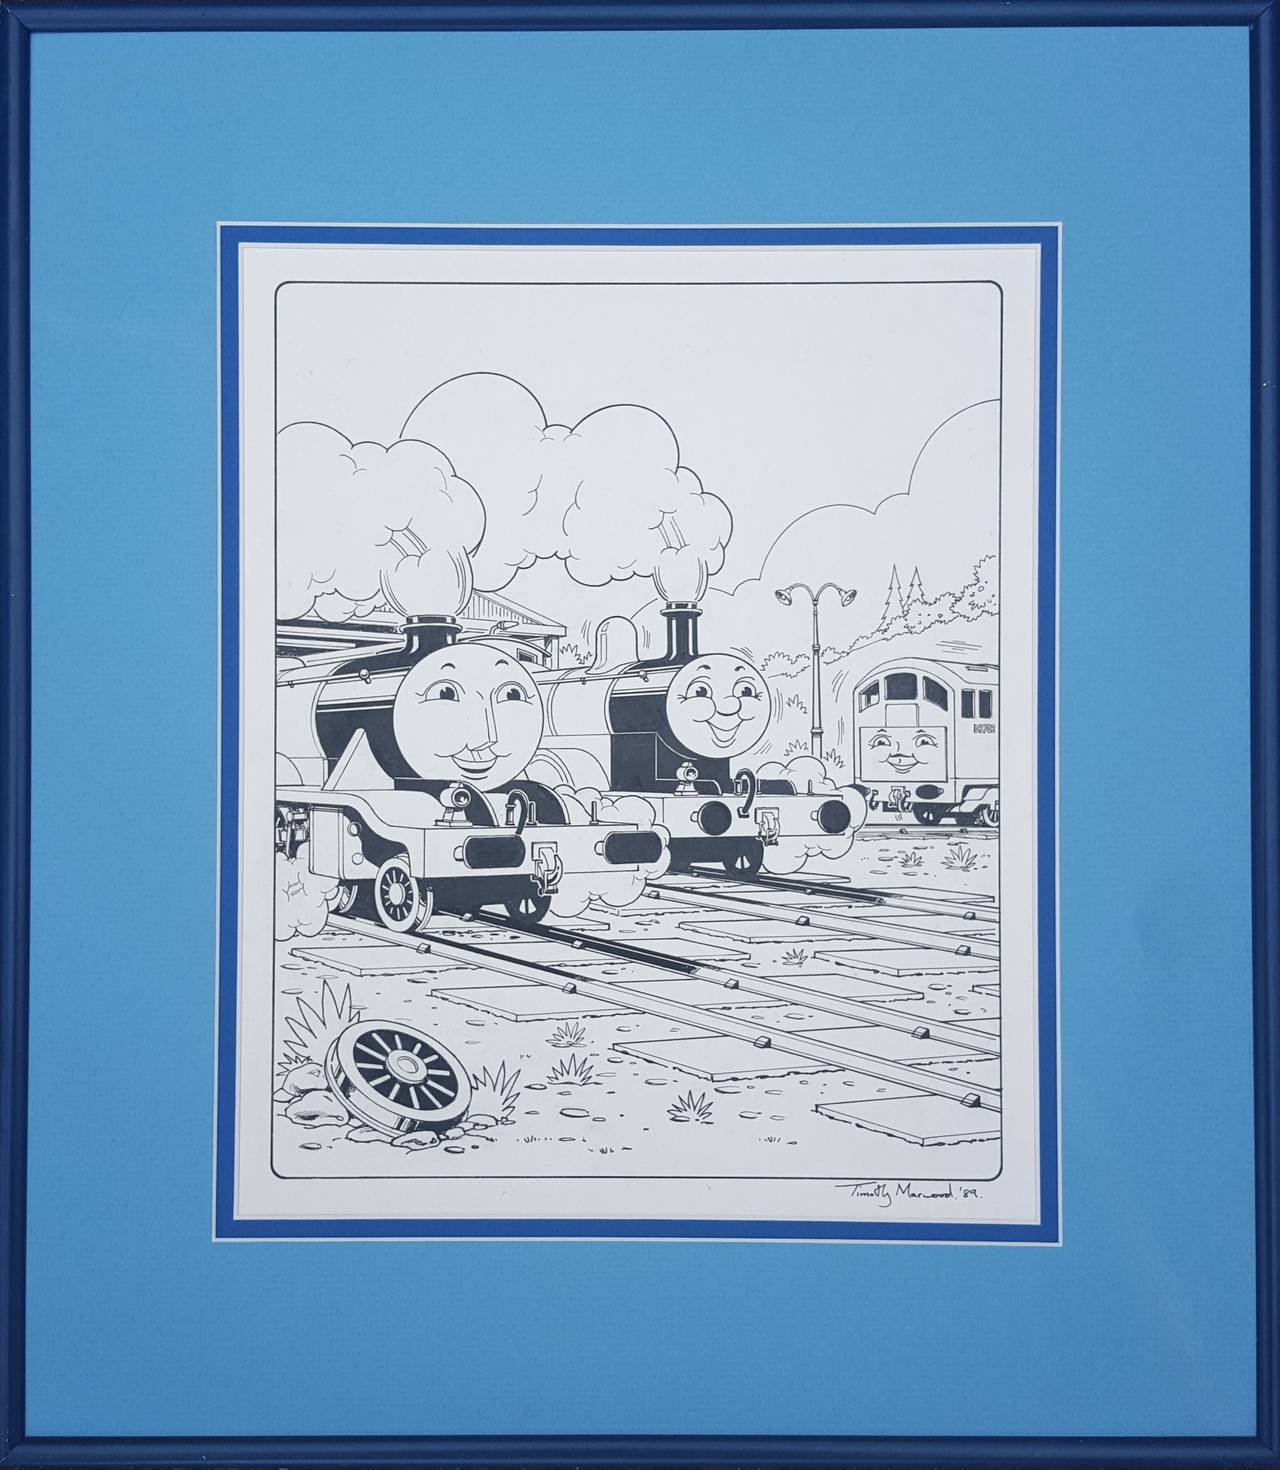 Thomas the Tank Engine and Friends - Art by Timothy Marwood